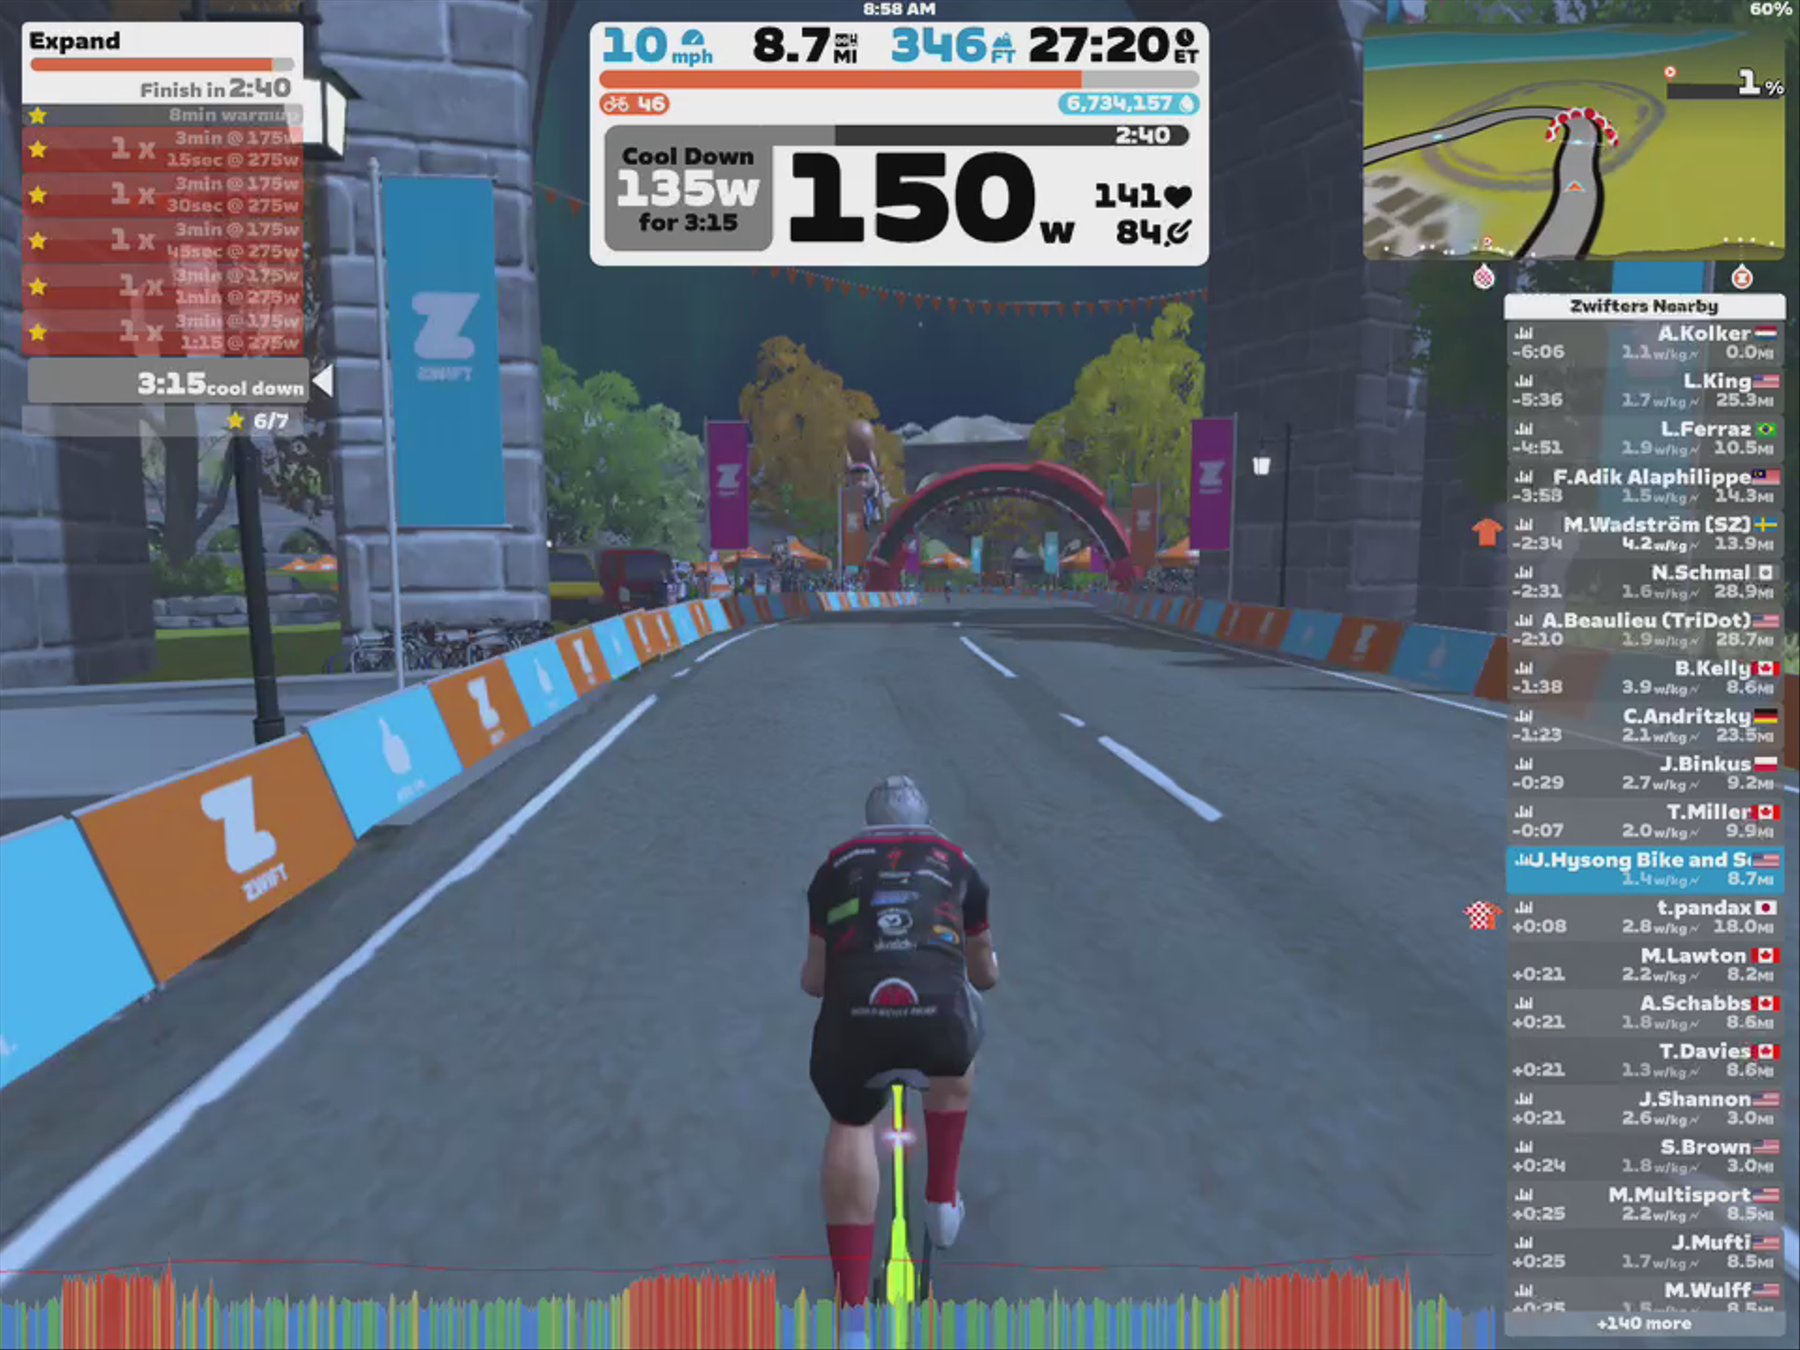 Zwift - Expand in Scotland